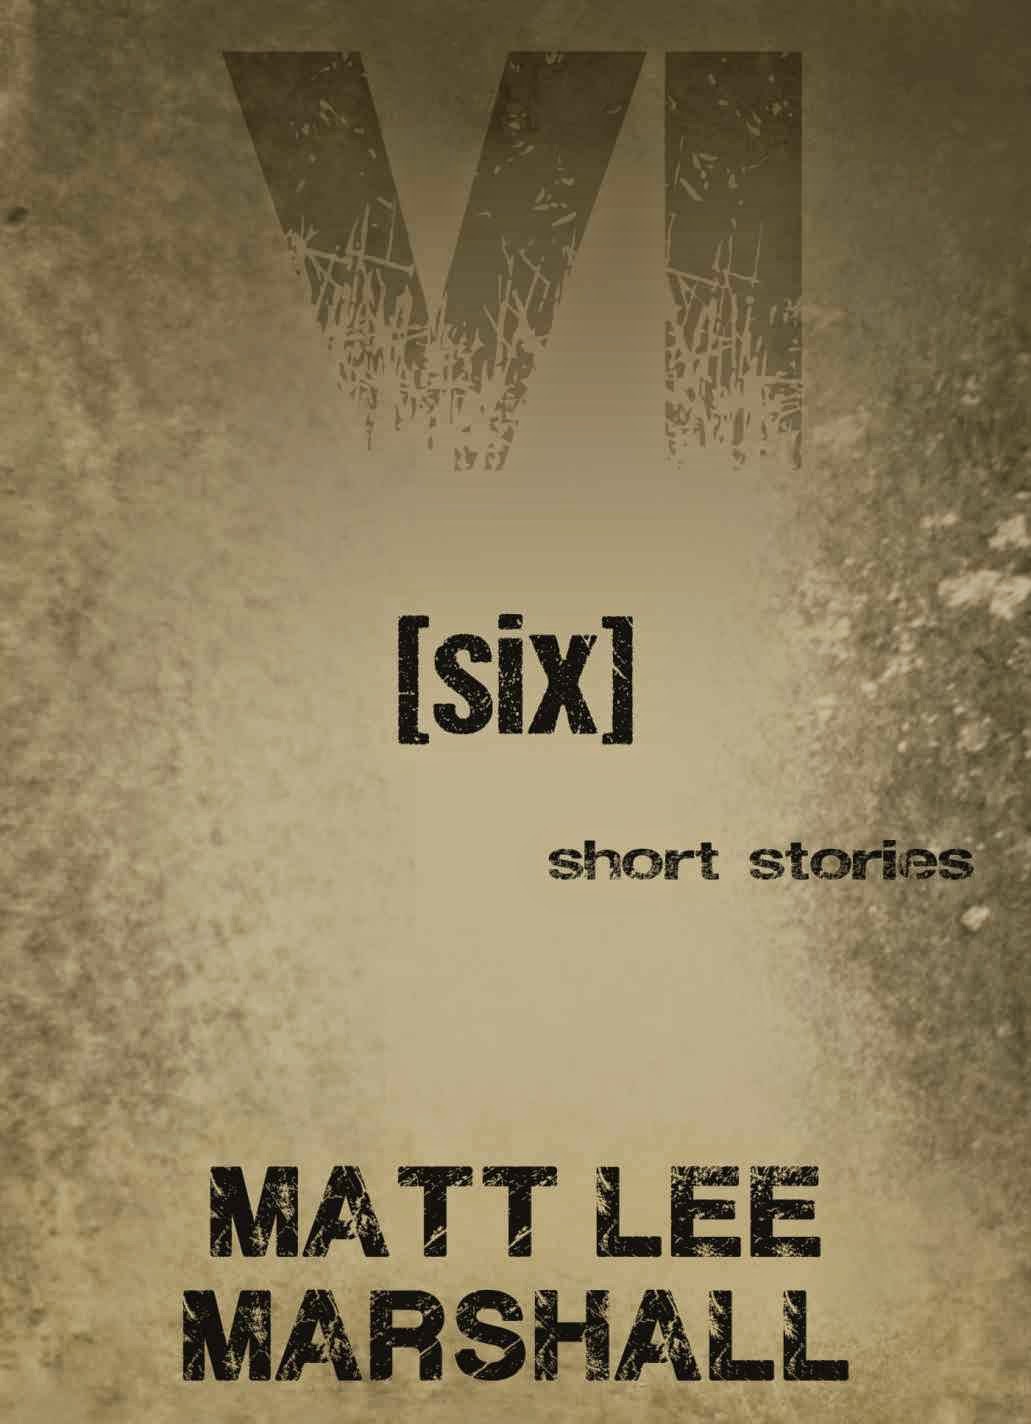 Check out my short story collection!